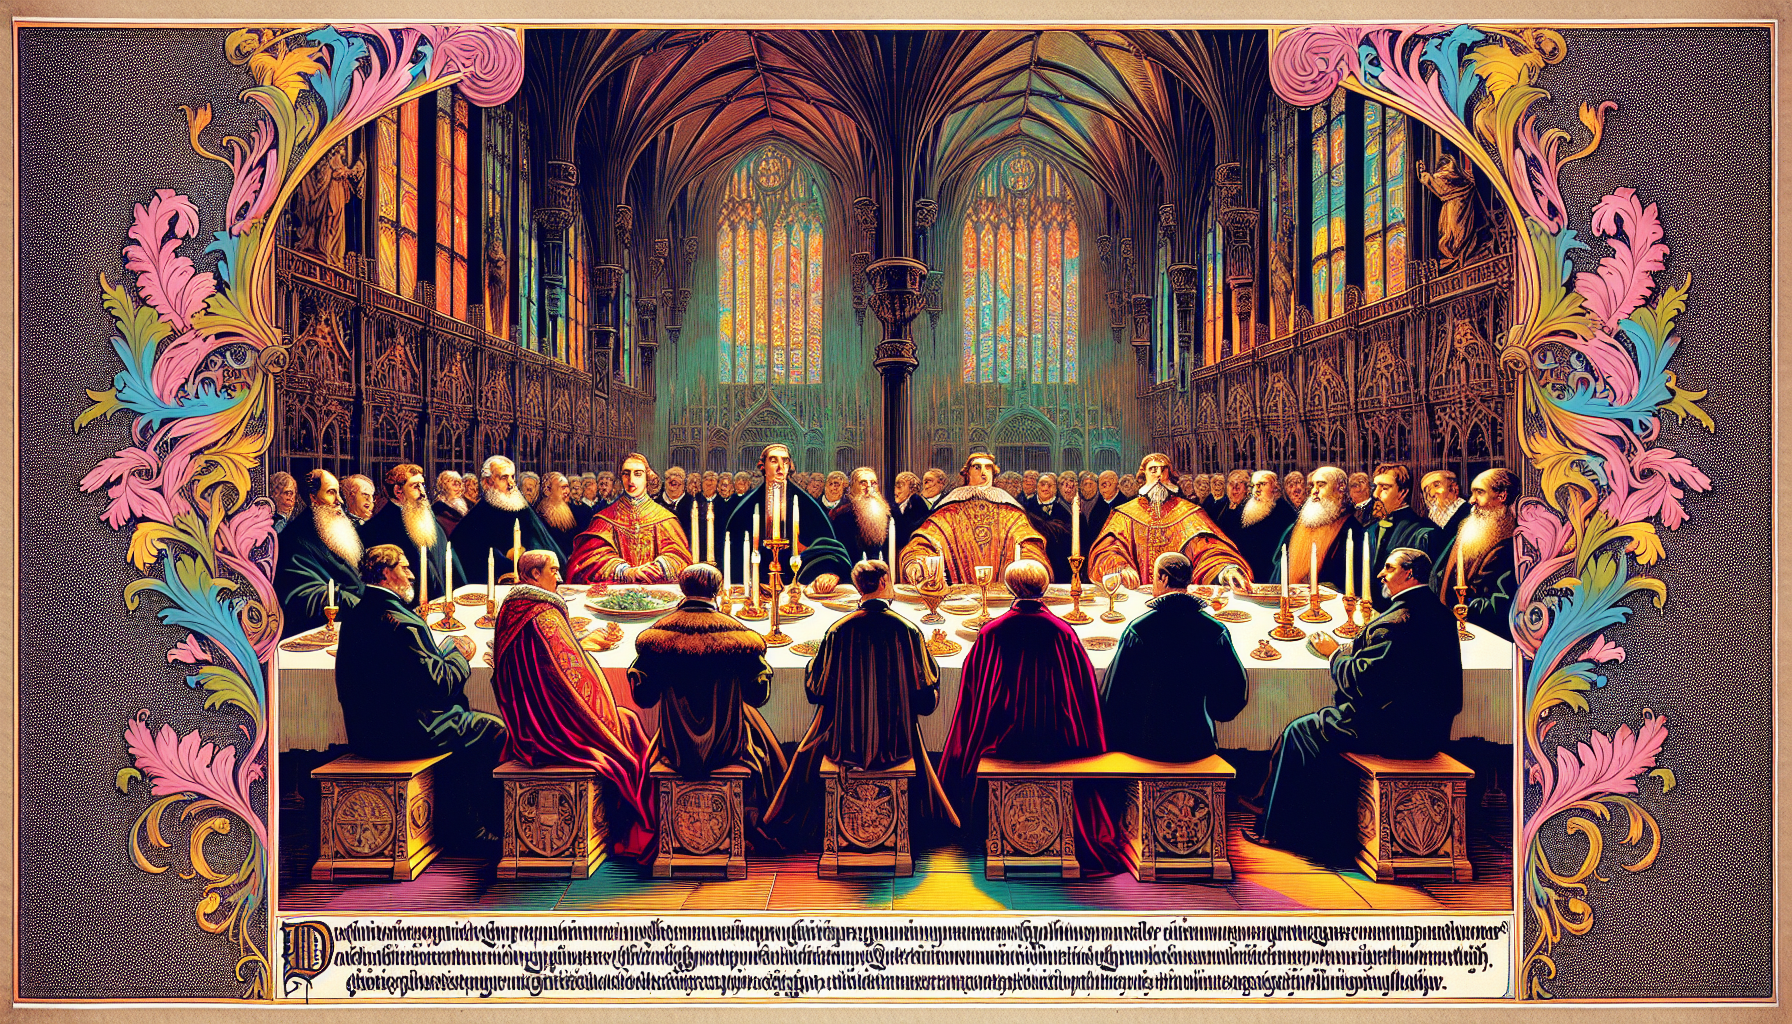 Artistic representation of the Last Supper featuring Jesus and the twelve apostles, each apostle's name elegantly inscribed above their heads in a grand, dimly lit dining hall with Gothic architecture